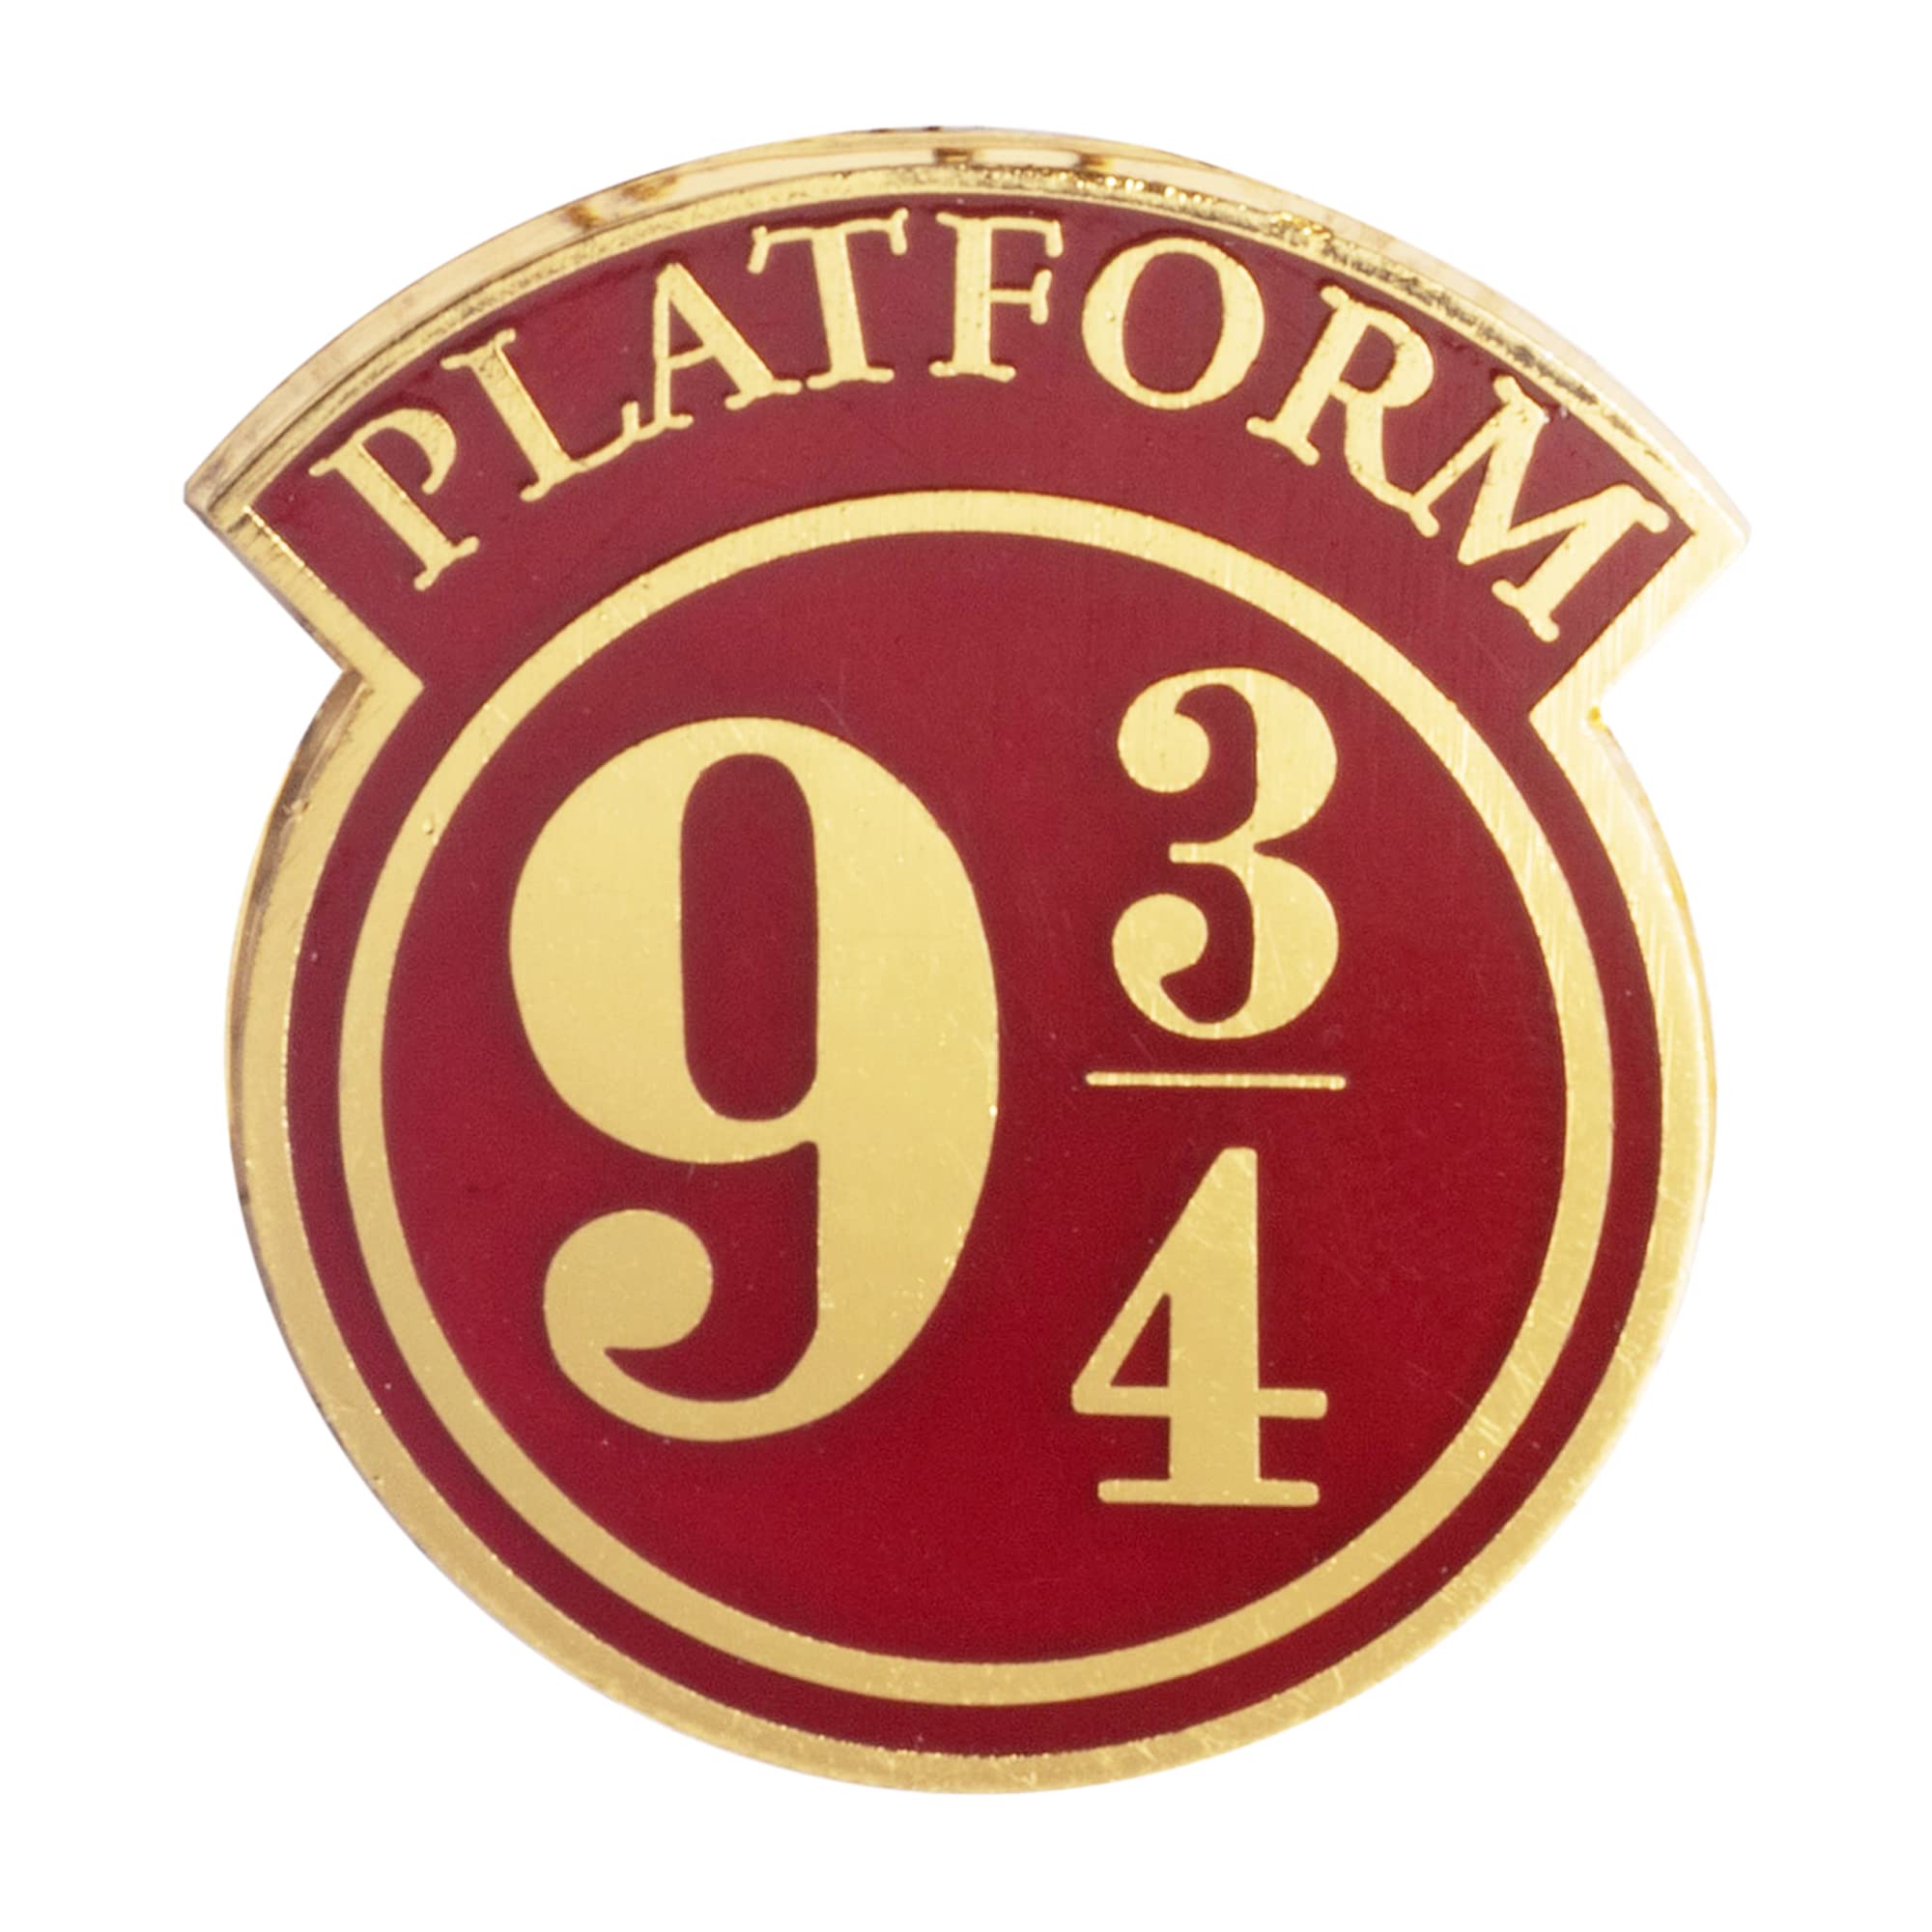 Harry Potter Enamel Pins, Set of 3 - Sorting Hat, Hogwarts Crest, Platform 9 3/4 - Collectible Metal Pin Button Accessory - Officially Licensed - Gift for Kids, Boys, Girls & Teens